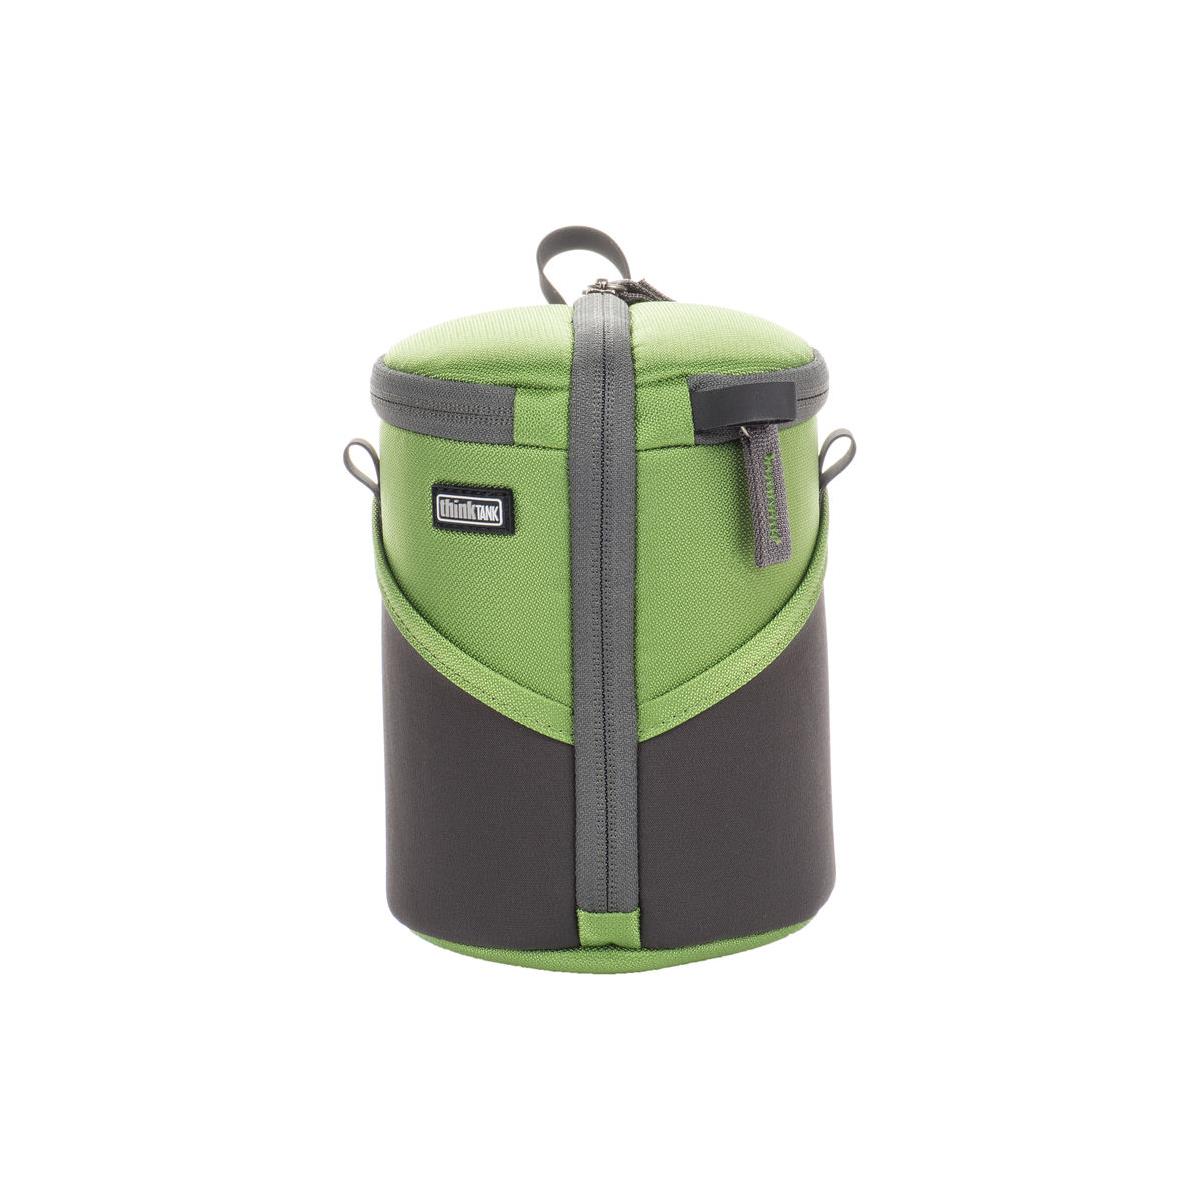 Think Tank Lens Case Duo 20 (Green)